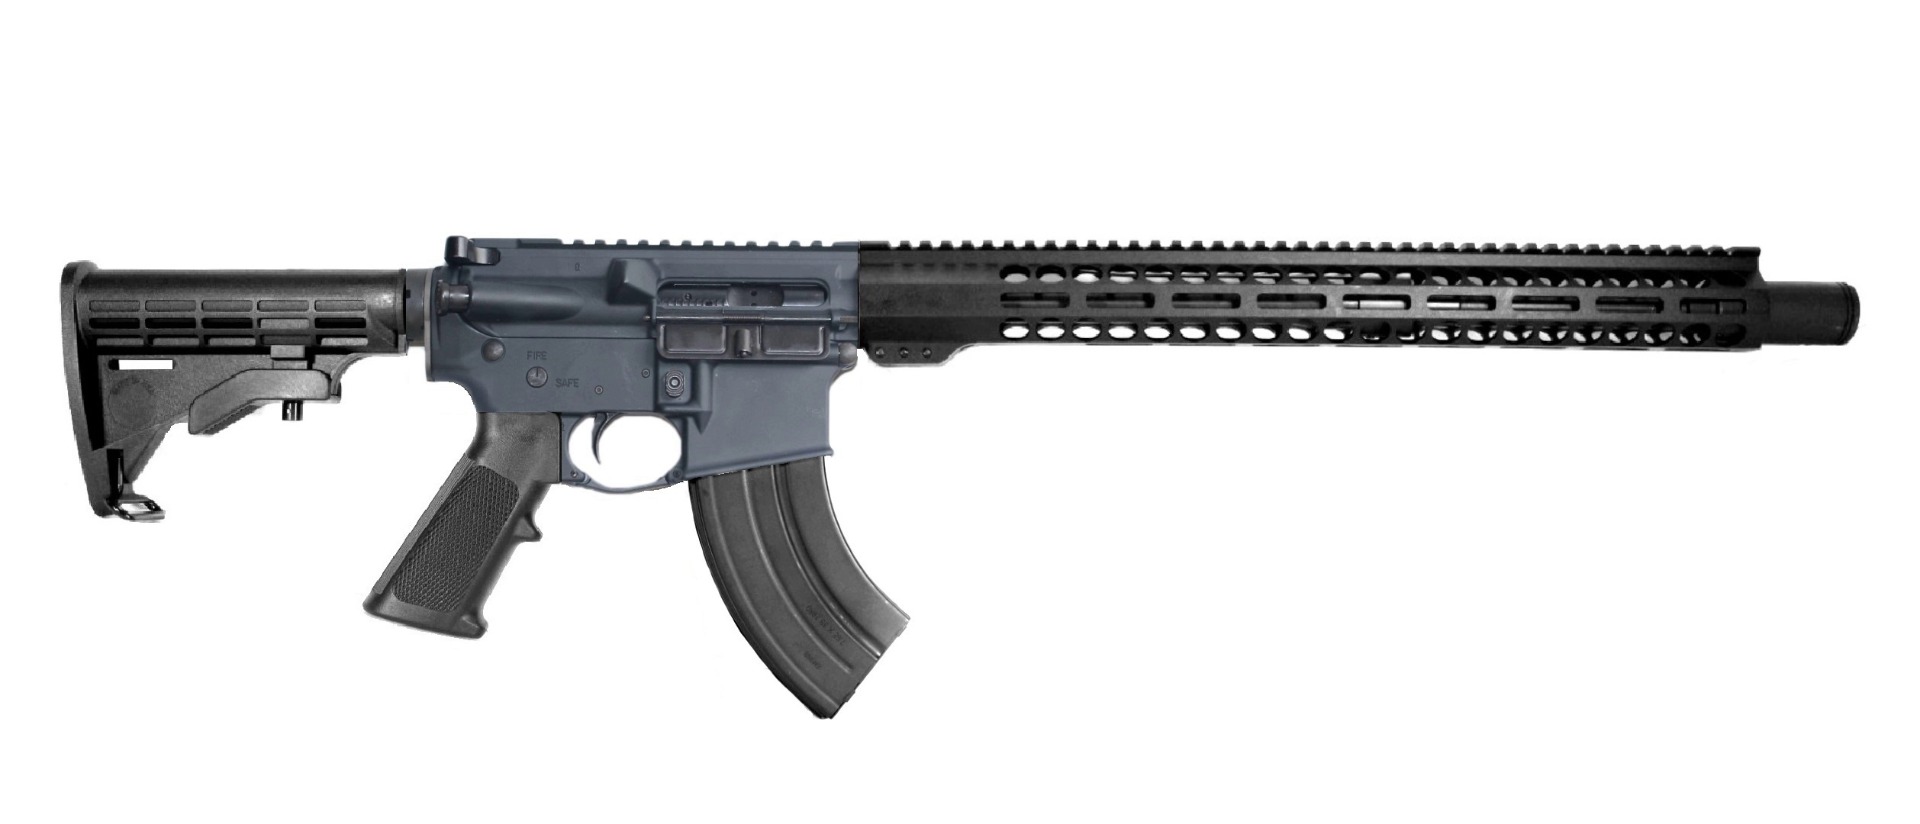 P2A PATRIOT 16" 7.62x39 1/10 Carbine Length Melonite M-LOK Rifle with Flash Can - GRAY/BLK